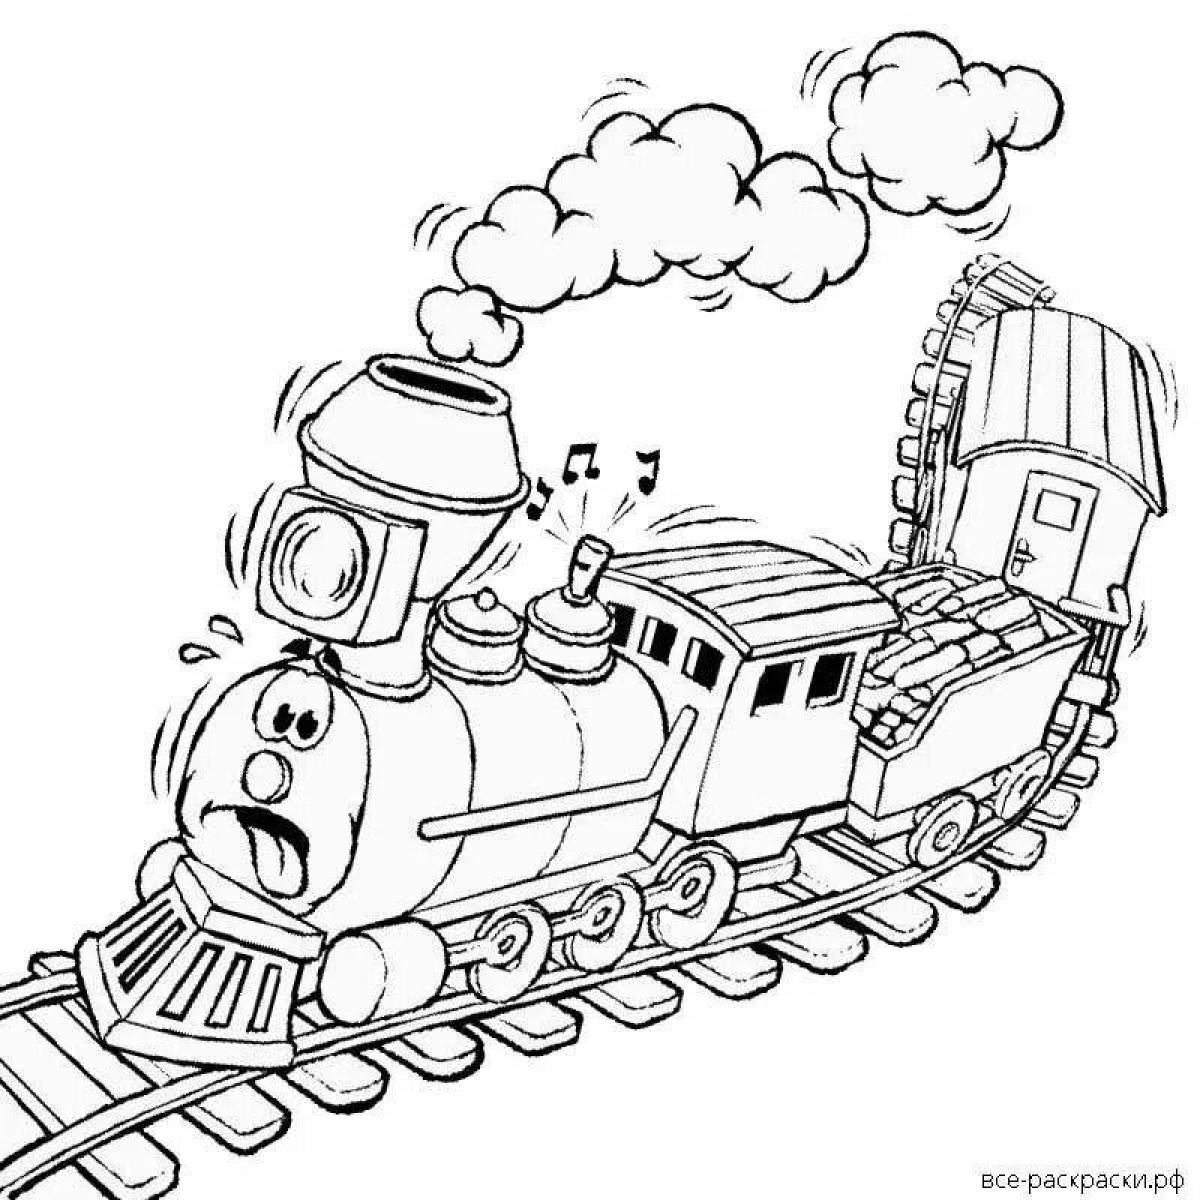 Colorful military train coloring page